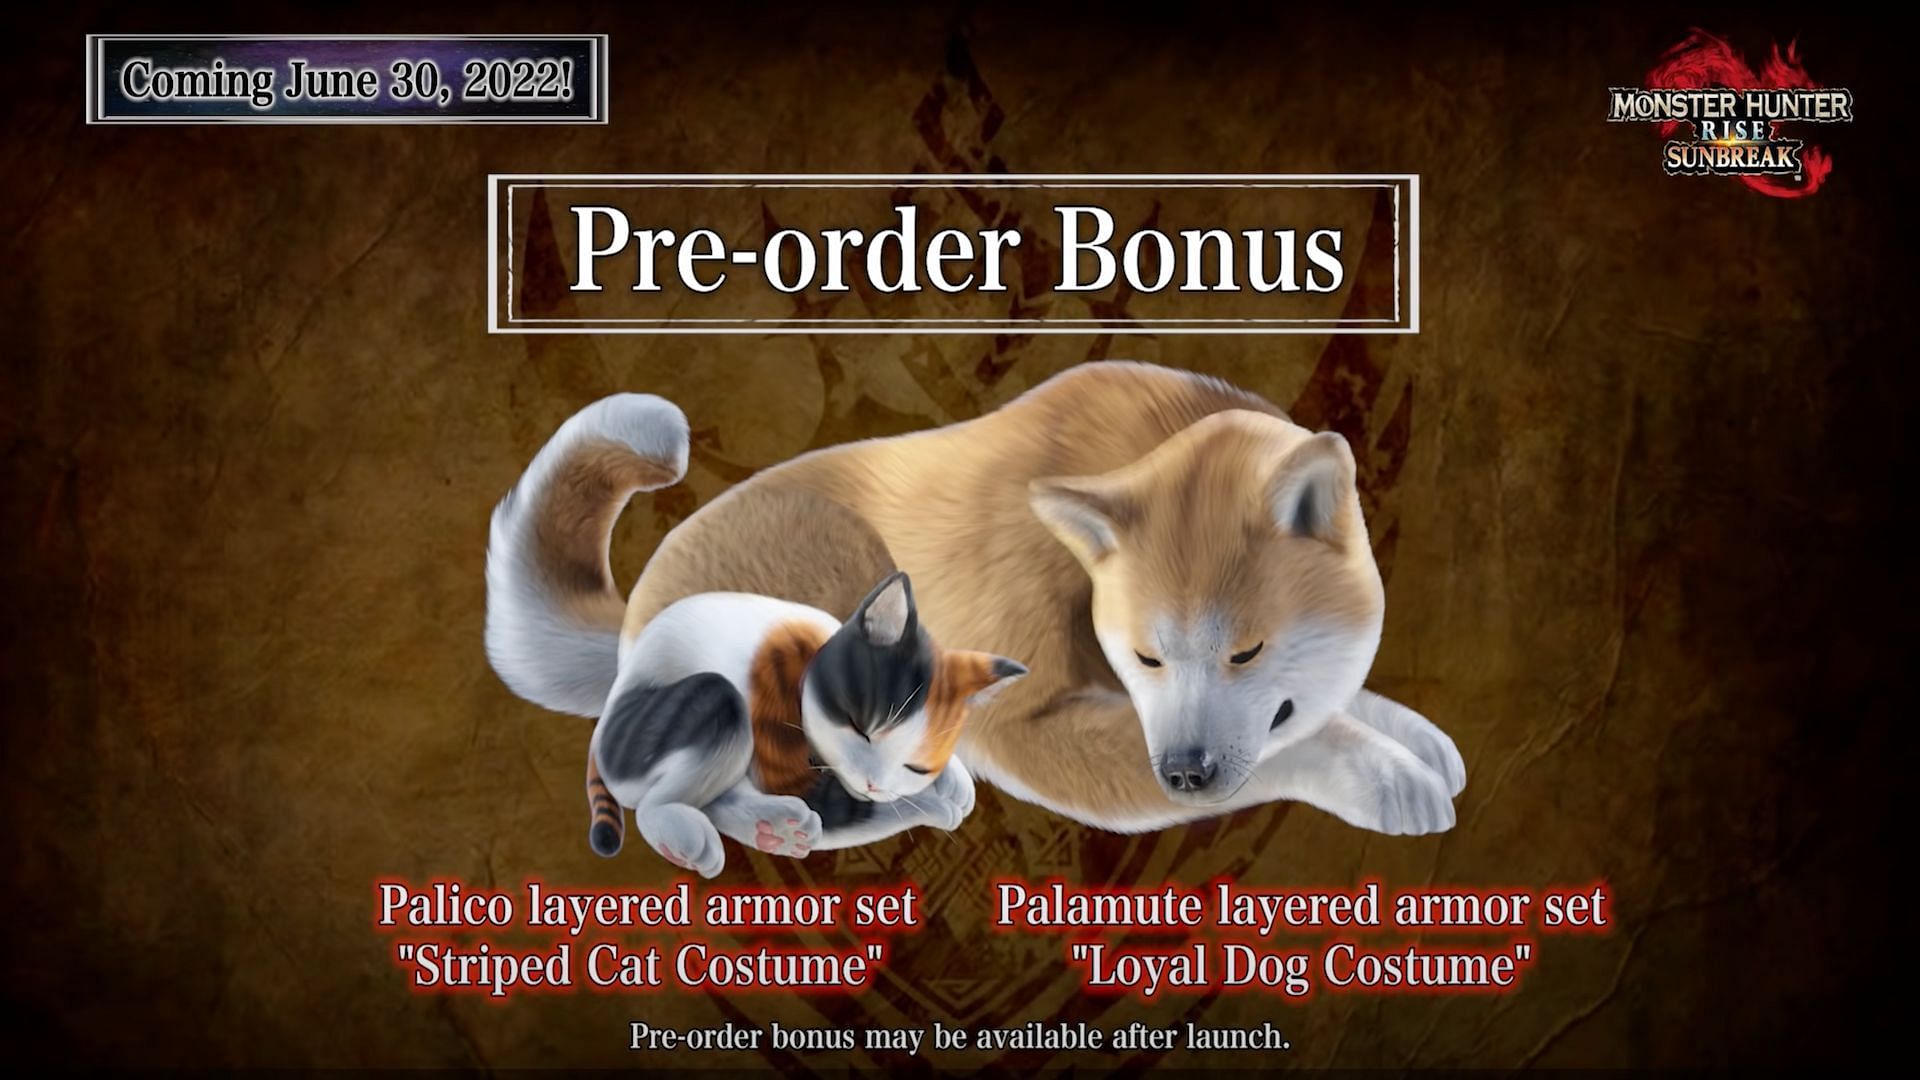 All players who pre-order the game from the Standard Edition and up will receive two costumes for their Palico and Palamute in-game (Image via Monster Hunter/YouTube)